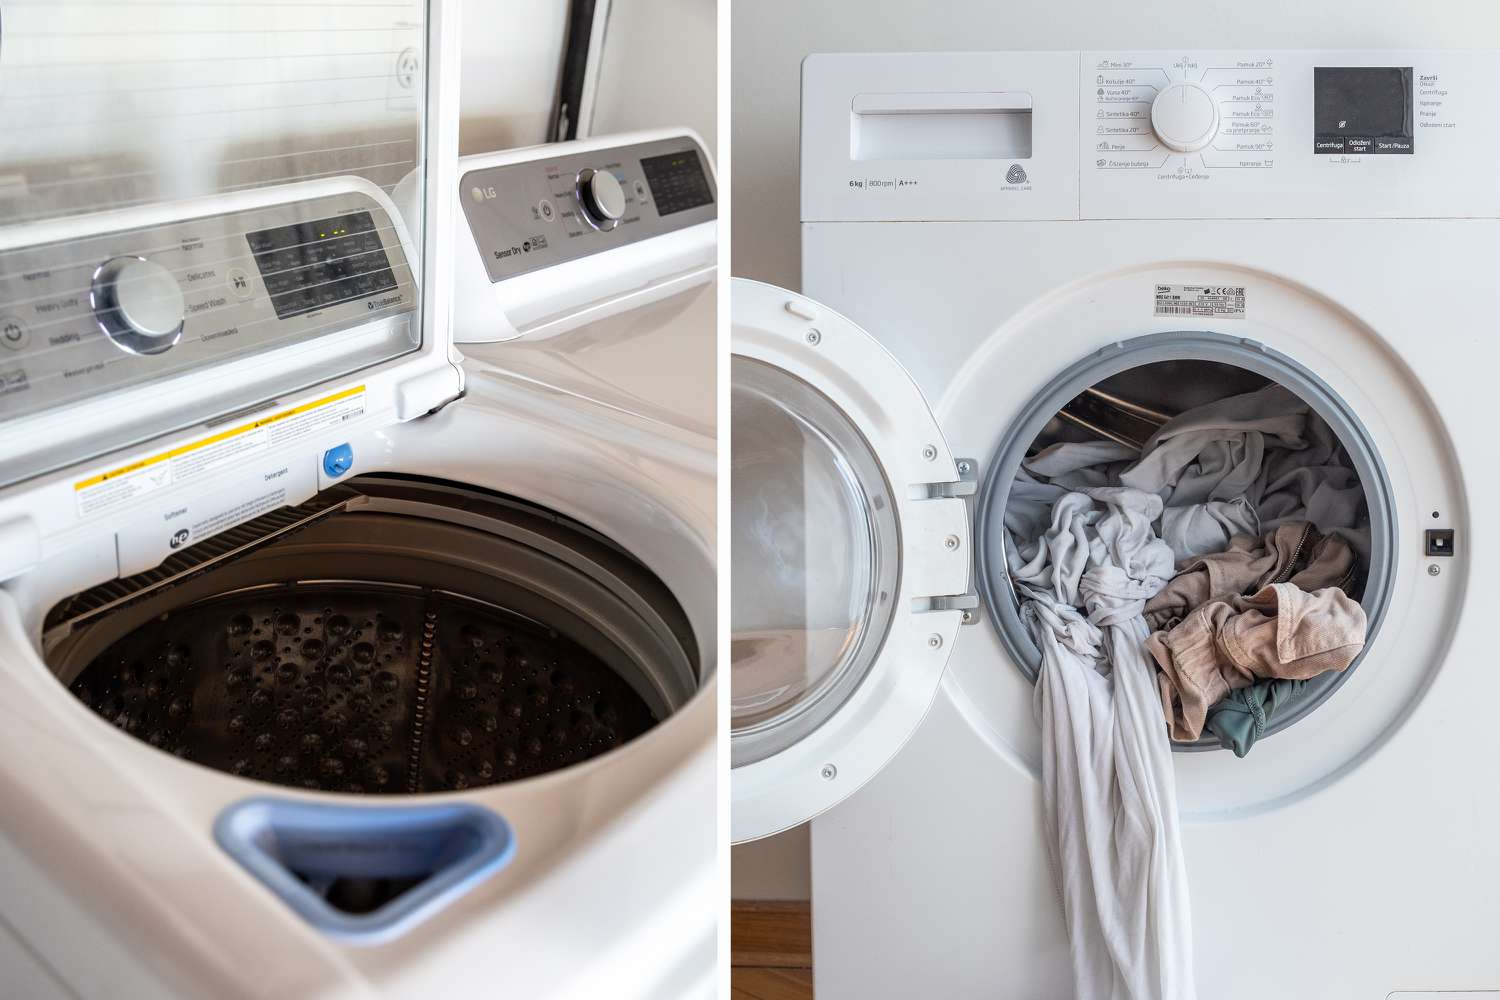 A top load washer (left) versus a front load washer (right)